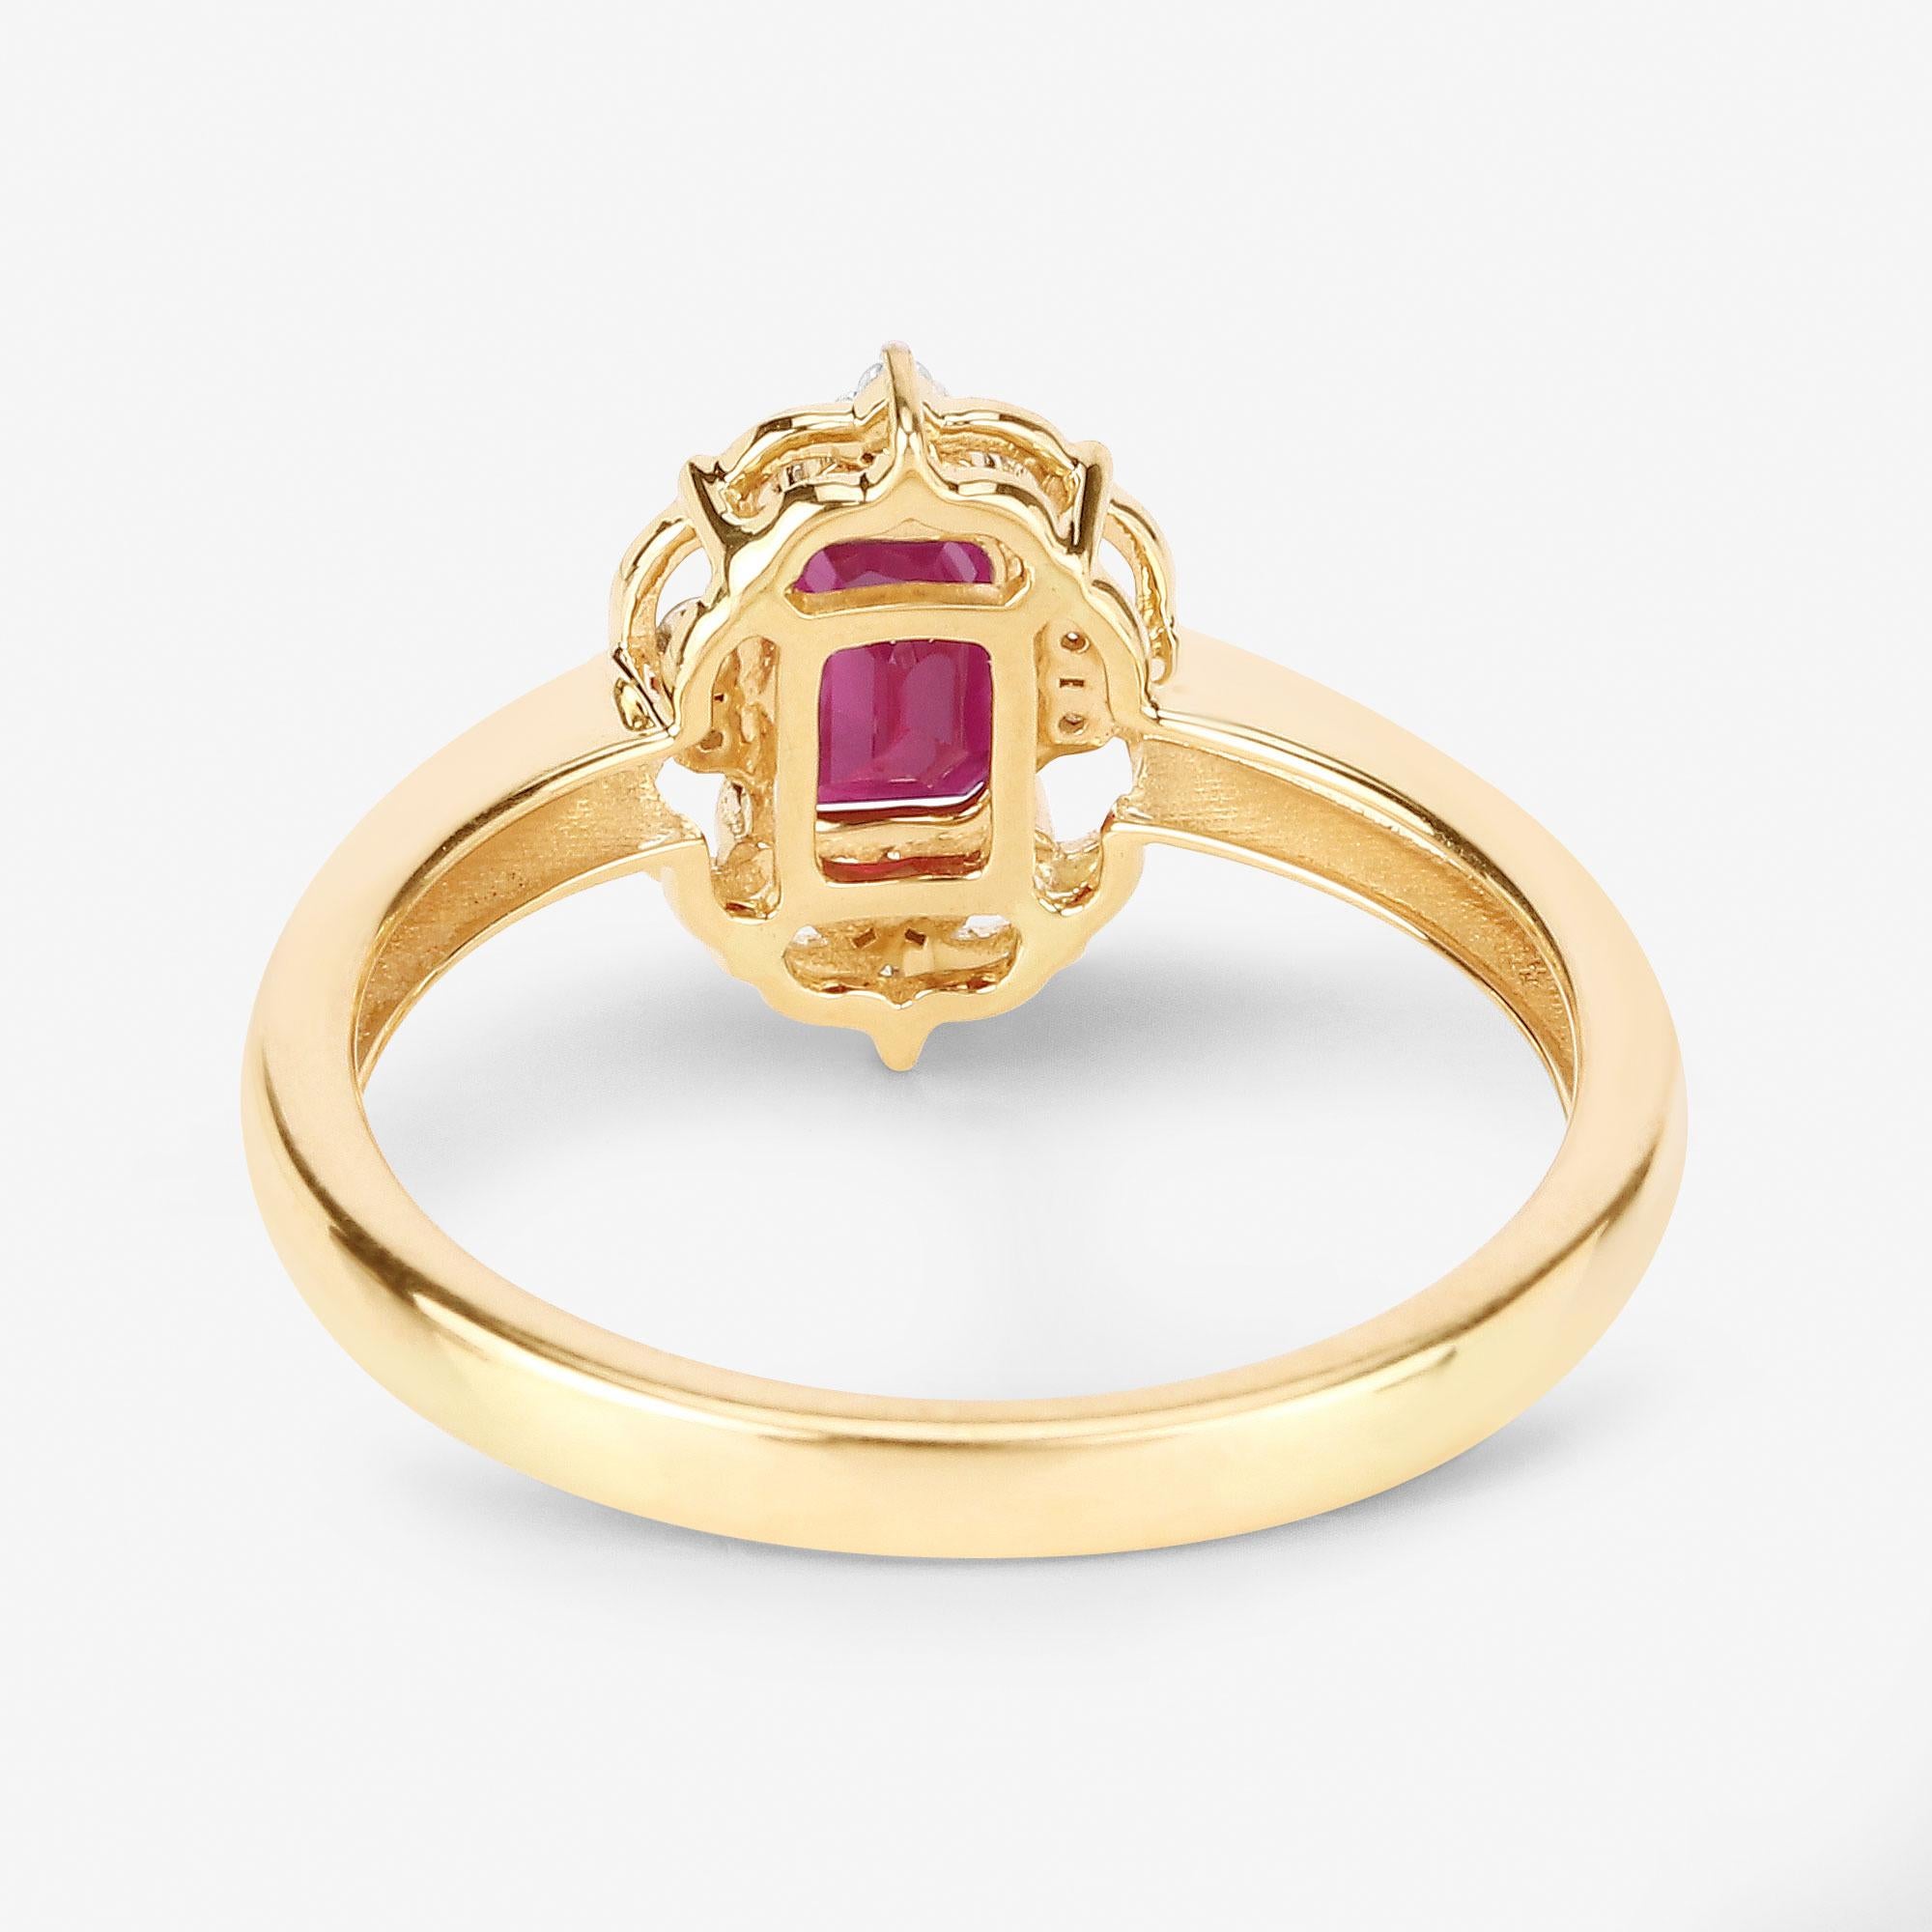 Emerald Cut Natural Ruby Ring With Diamonds 14K Yellow Gold For Sale